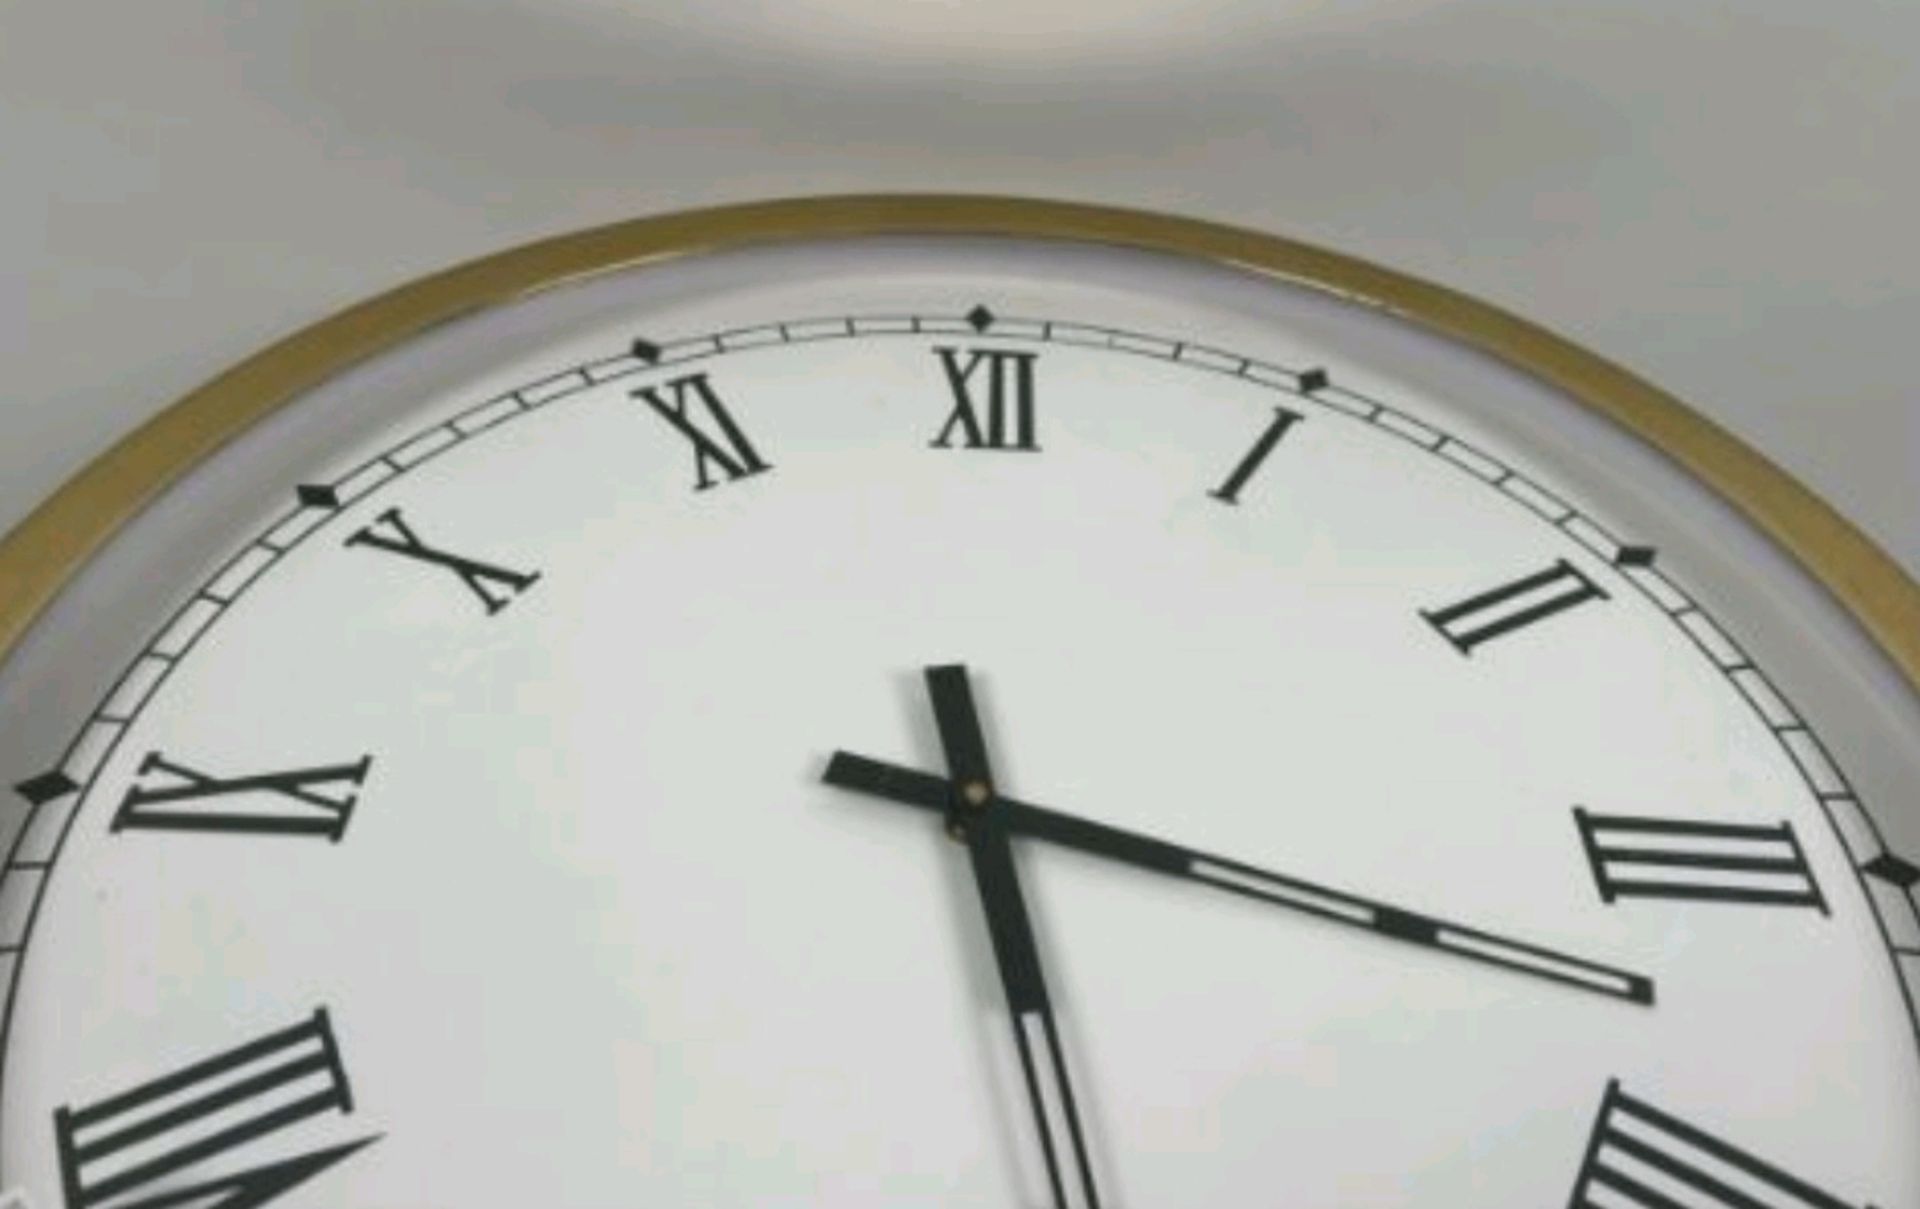 Gold Frame Wall Clock - Image 3 of 4